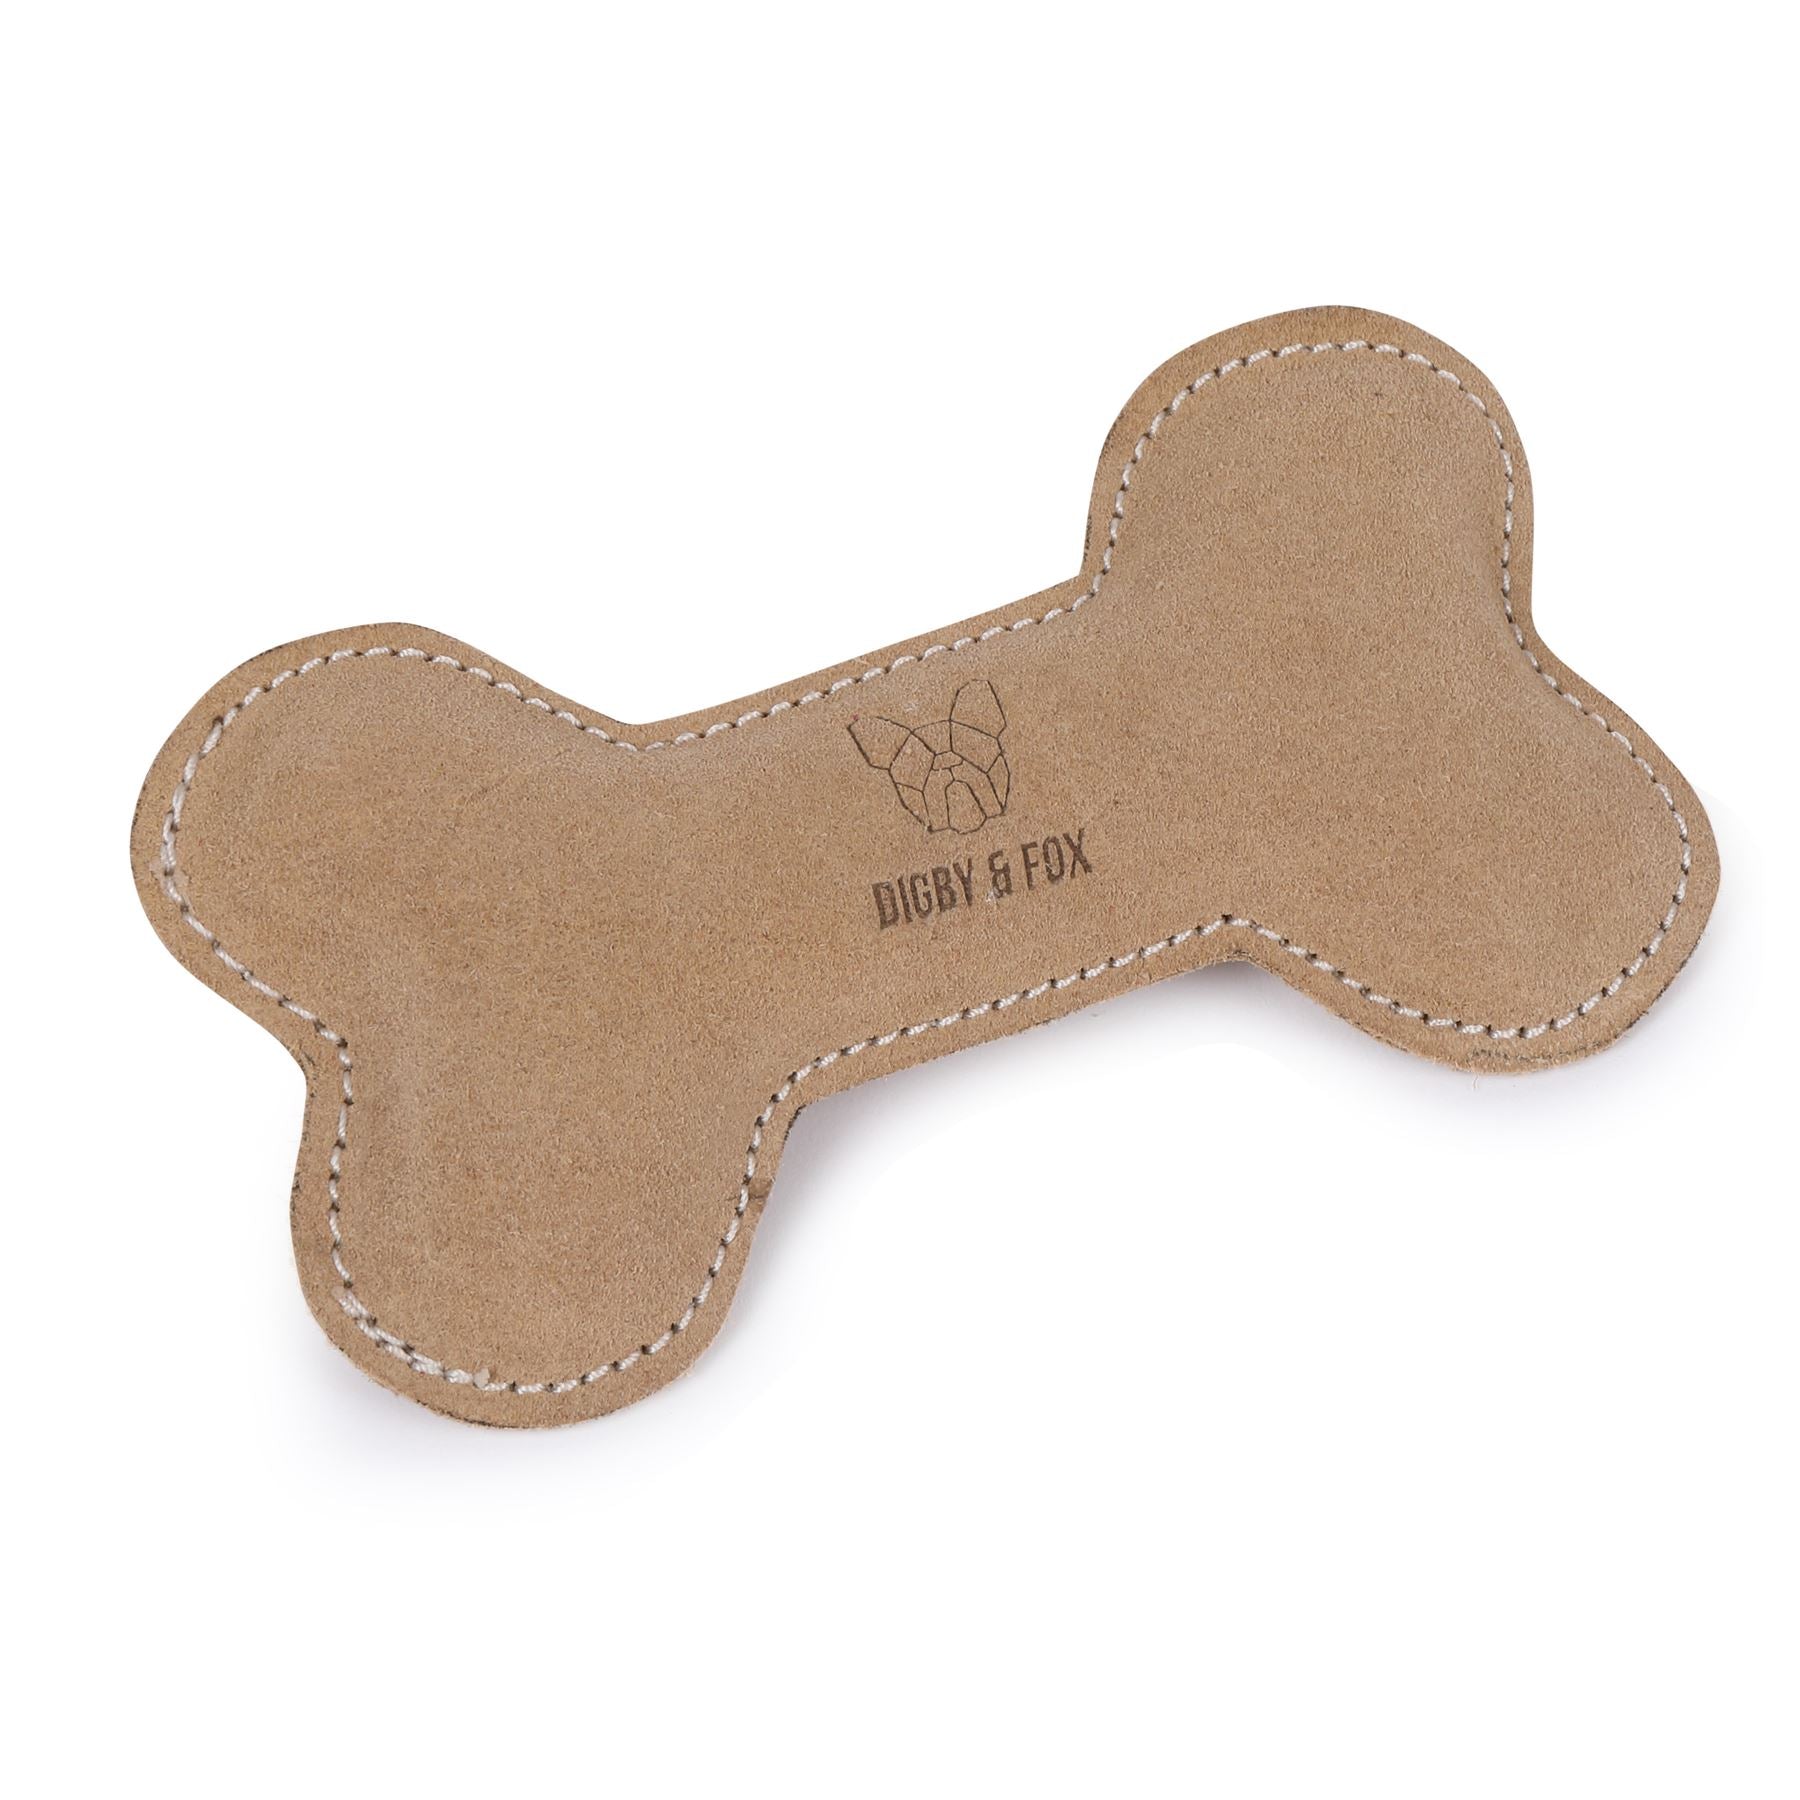 Digby & Fox Leather Bone Toy - Just Horse Riders